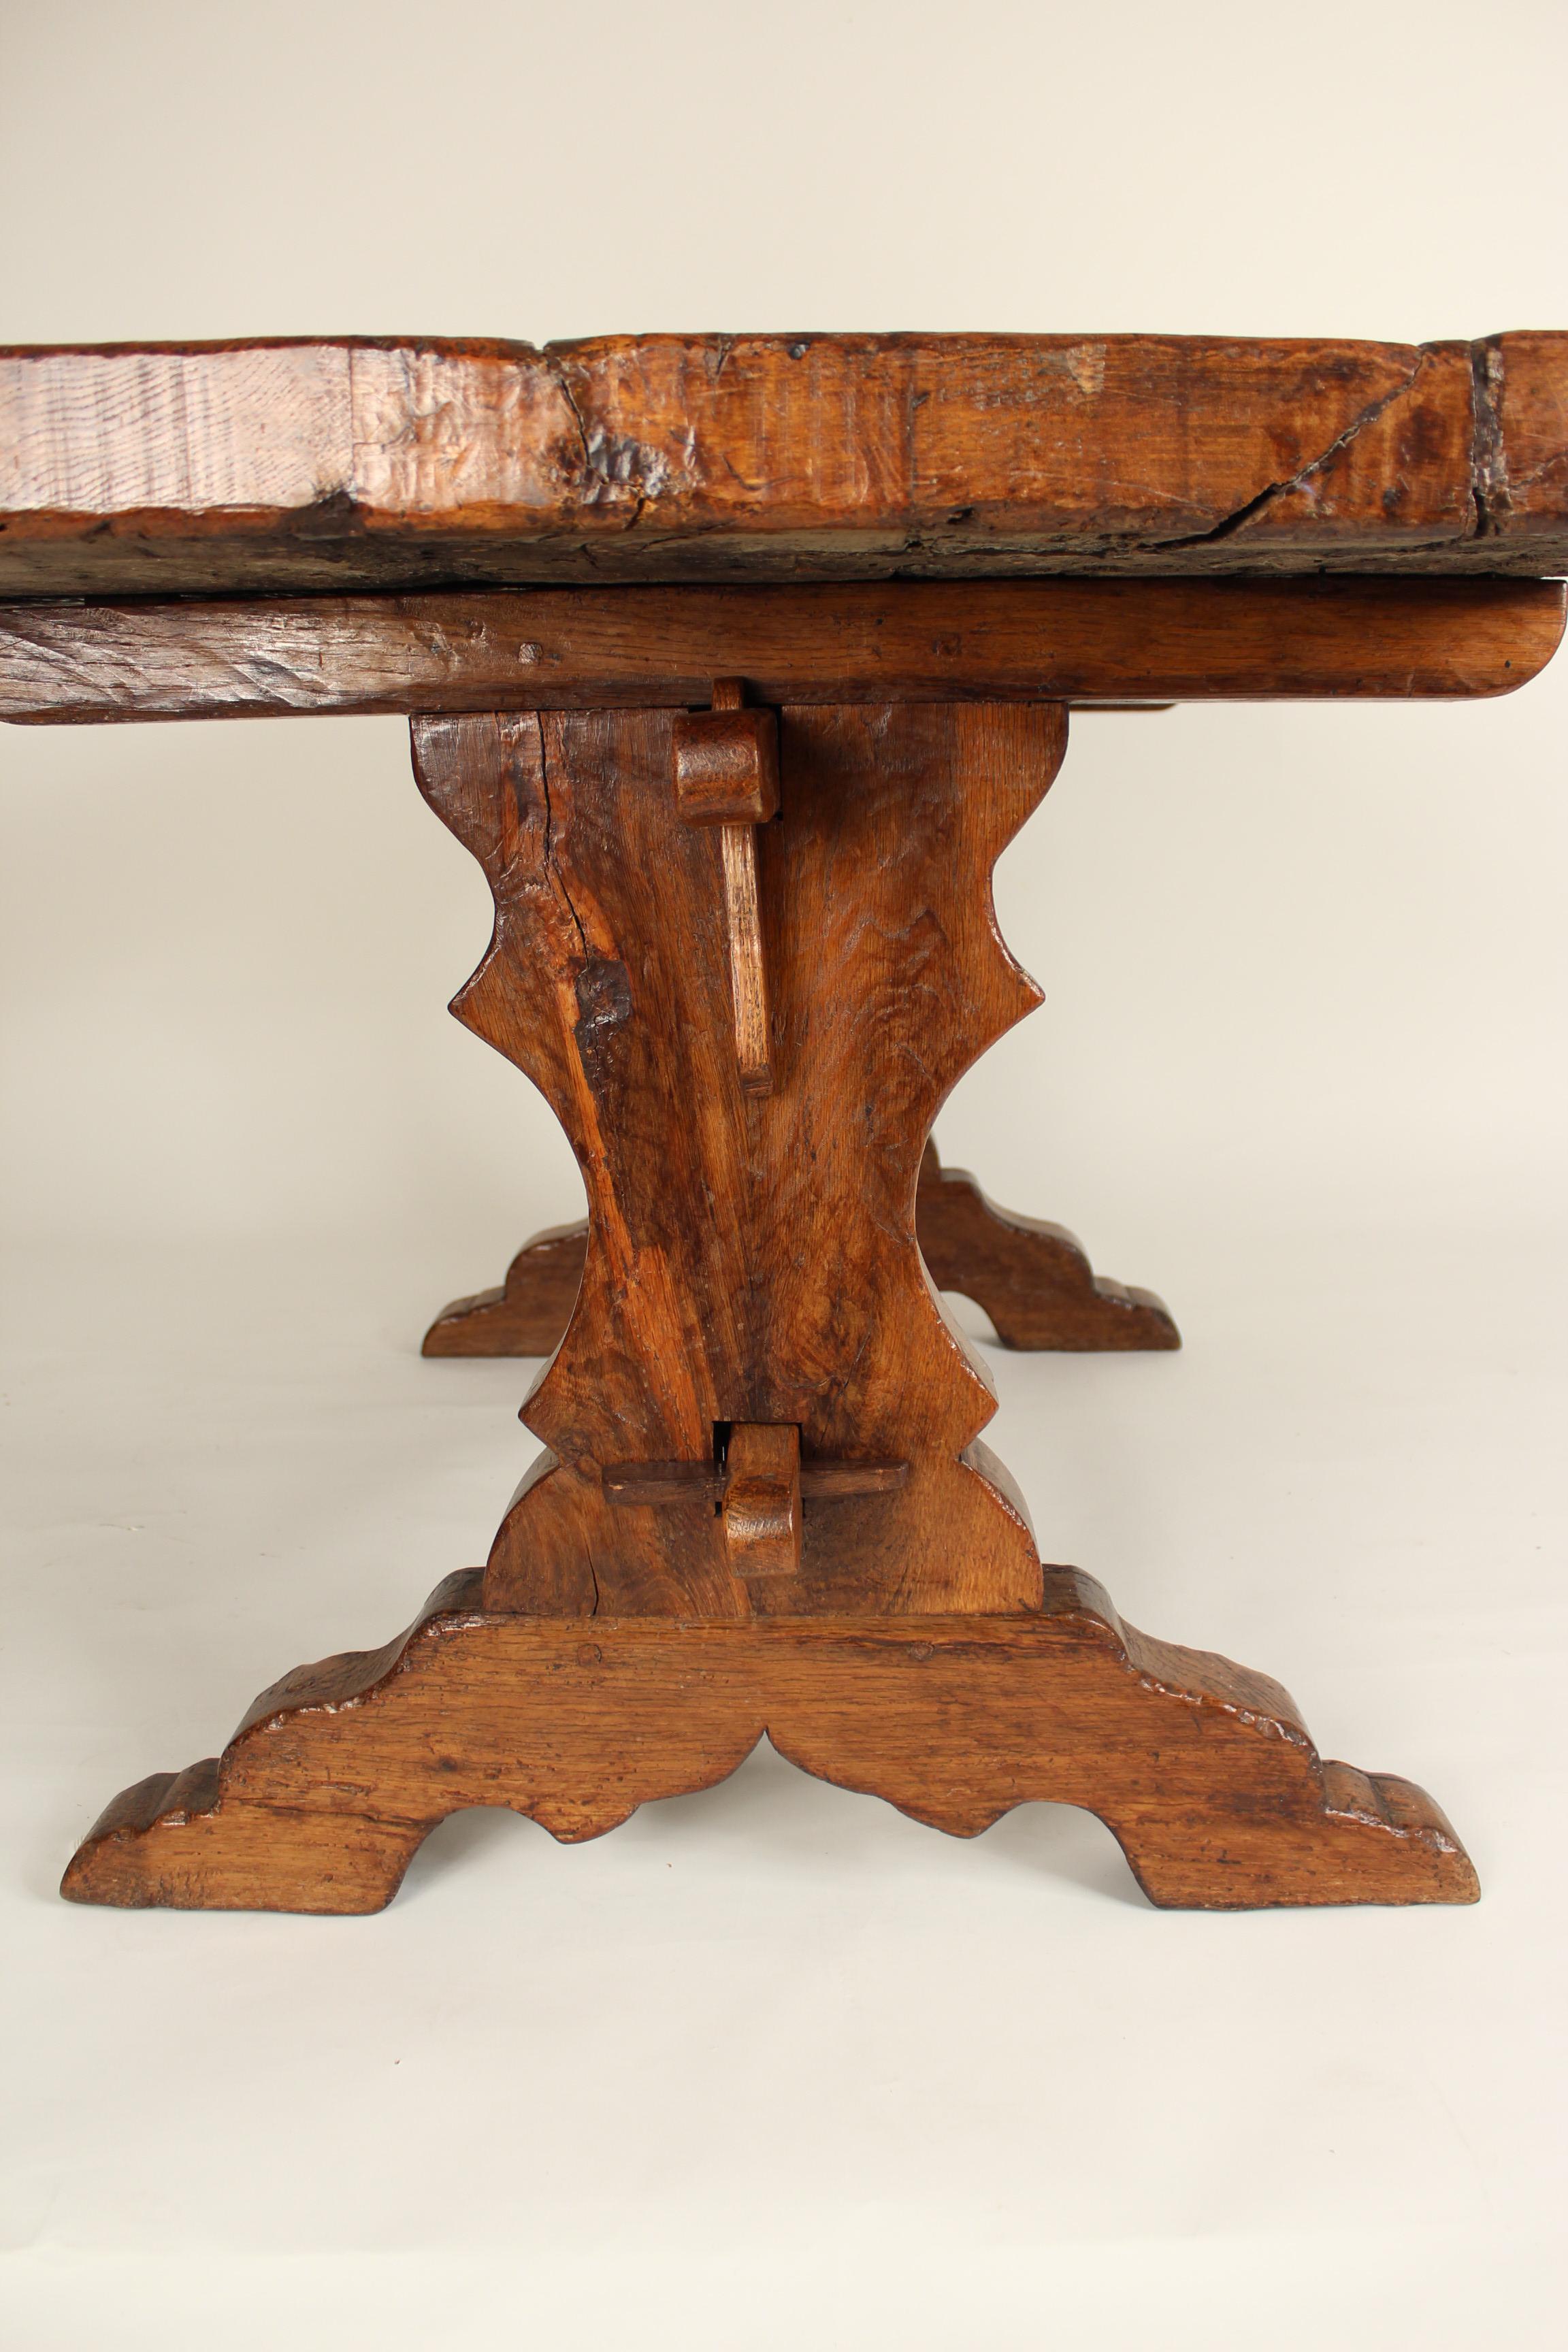 European Continental Fruit Wood Dining Room Table